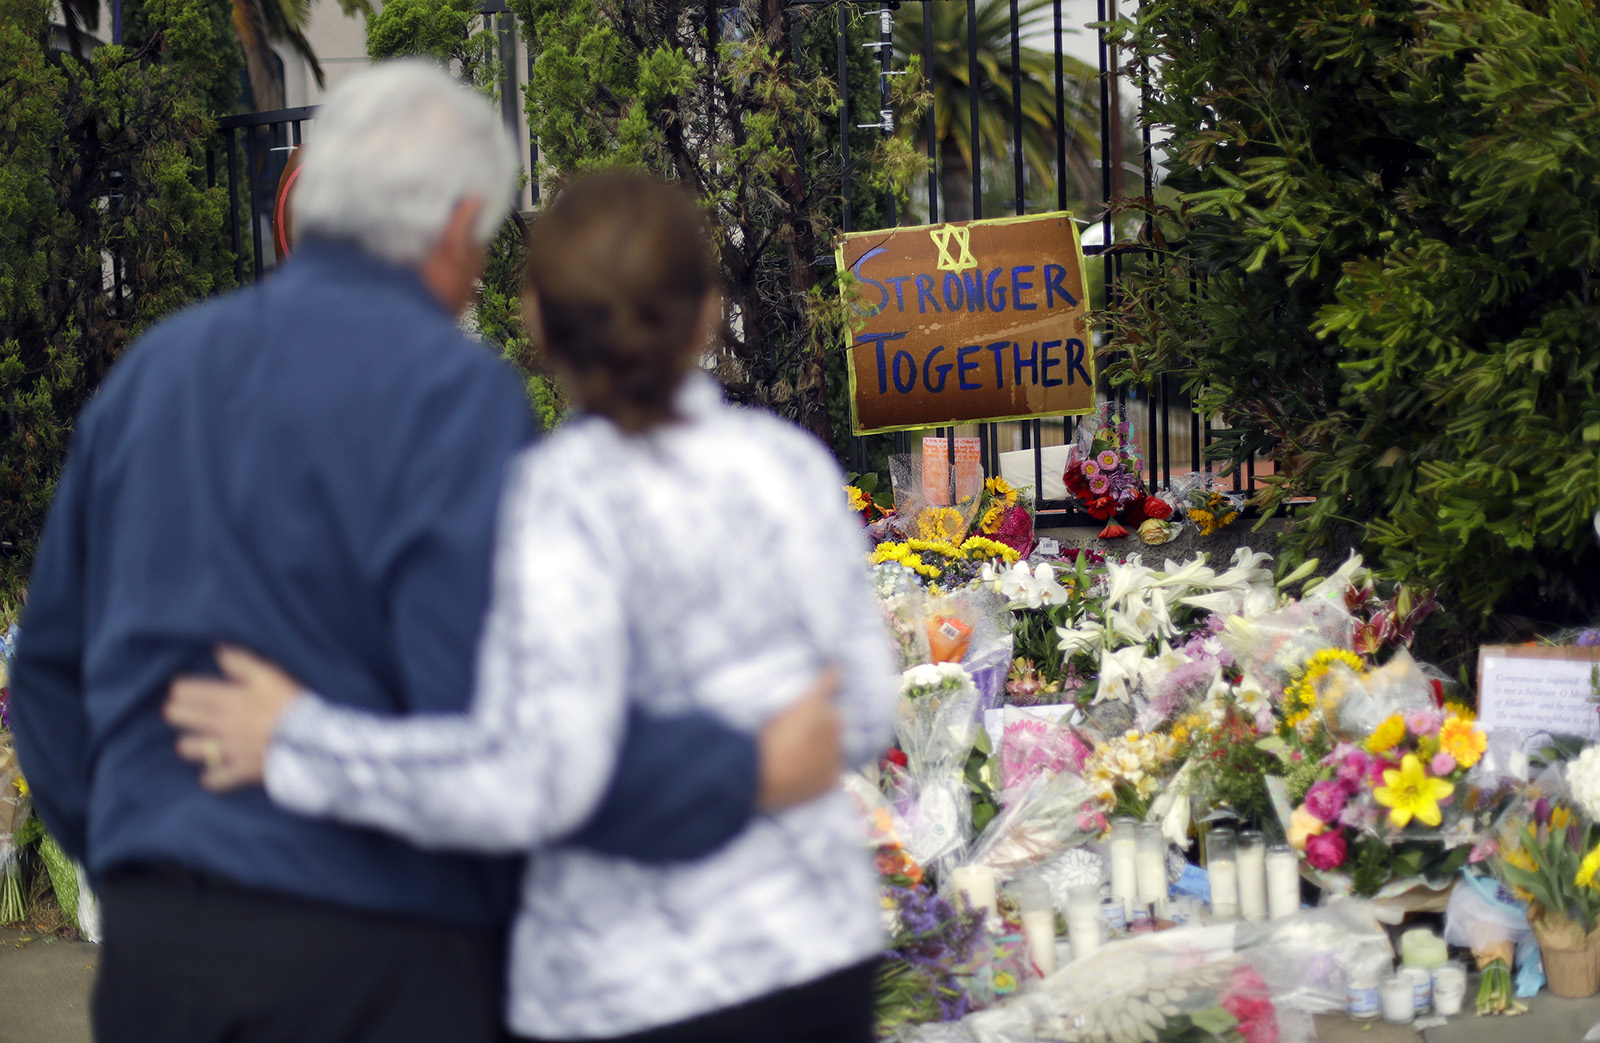 A couple embrace near a growing memorial across the street from the Chabad of Poway Synagogue in Poway, California, on April 29, 2019. A gunman opened fire two days before as about 100 people were worshipping, exactly six months after a mass shooting in a Pittsburgh synagogue. One person was killed in the Poway attack. (AP Photo/Greg Bull)